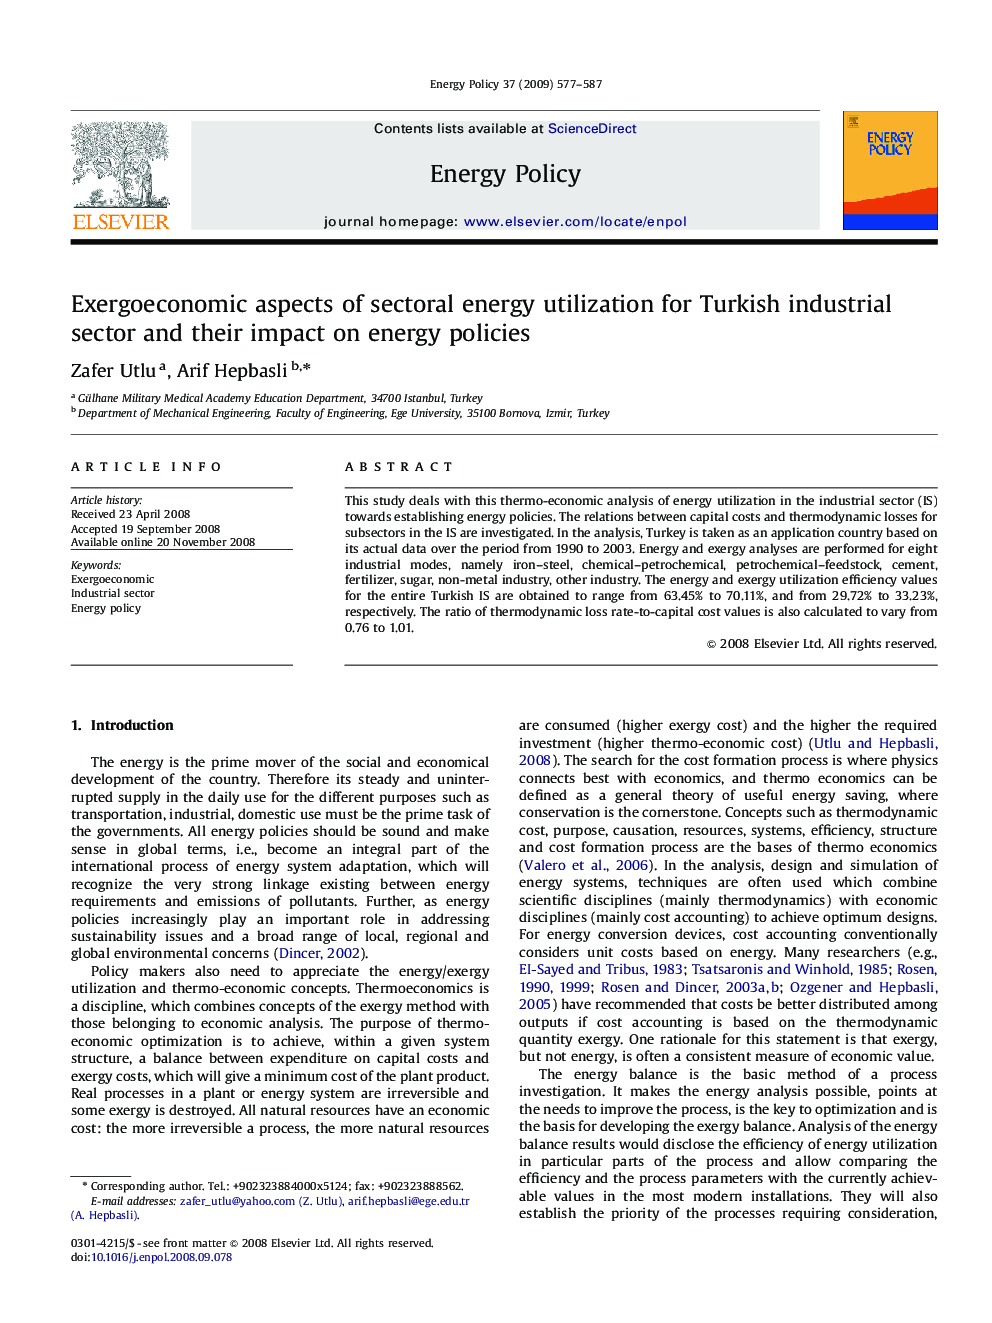 Exergoeconomic aspects of sectoral energy utilization for Turkish industrial sector and their impact on energy policies